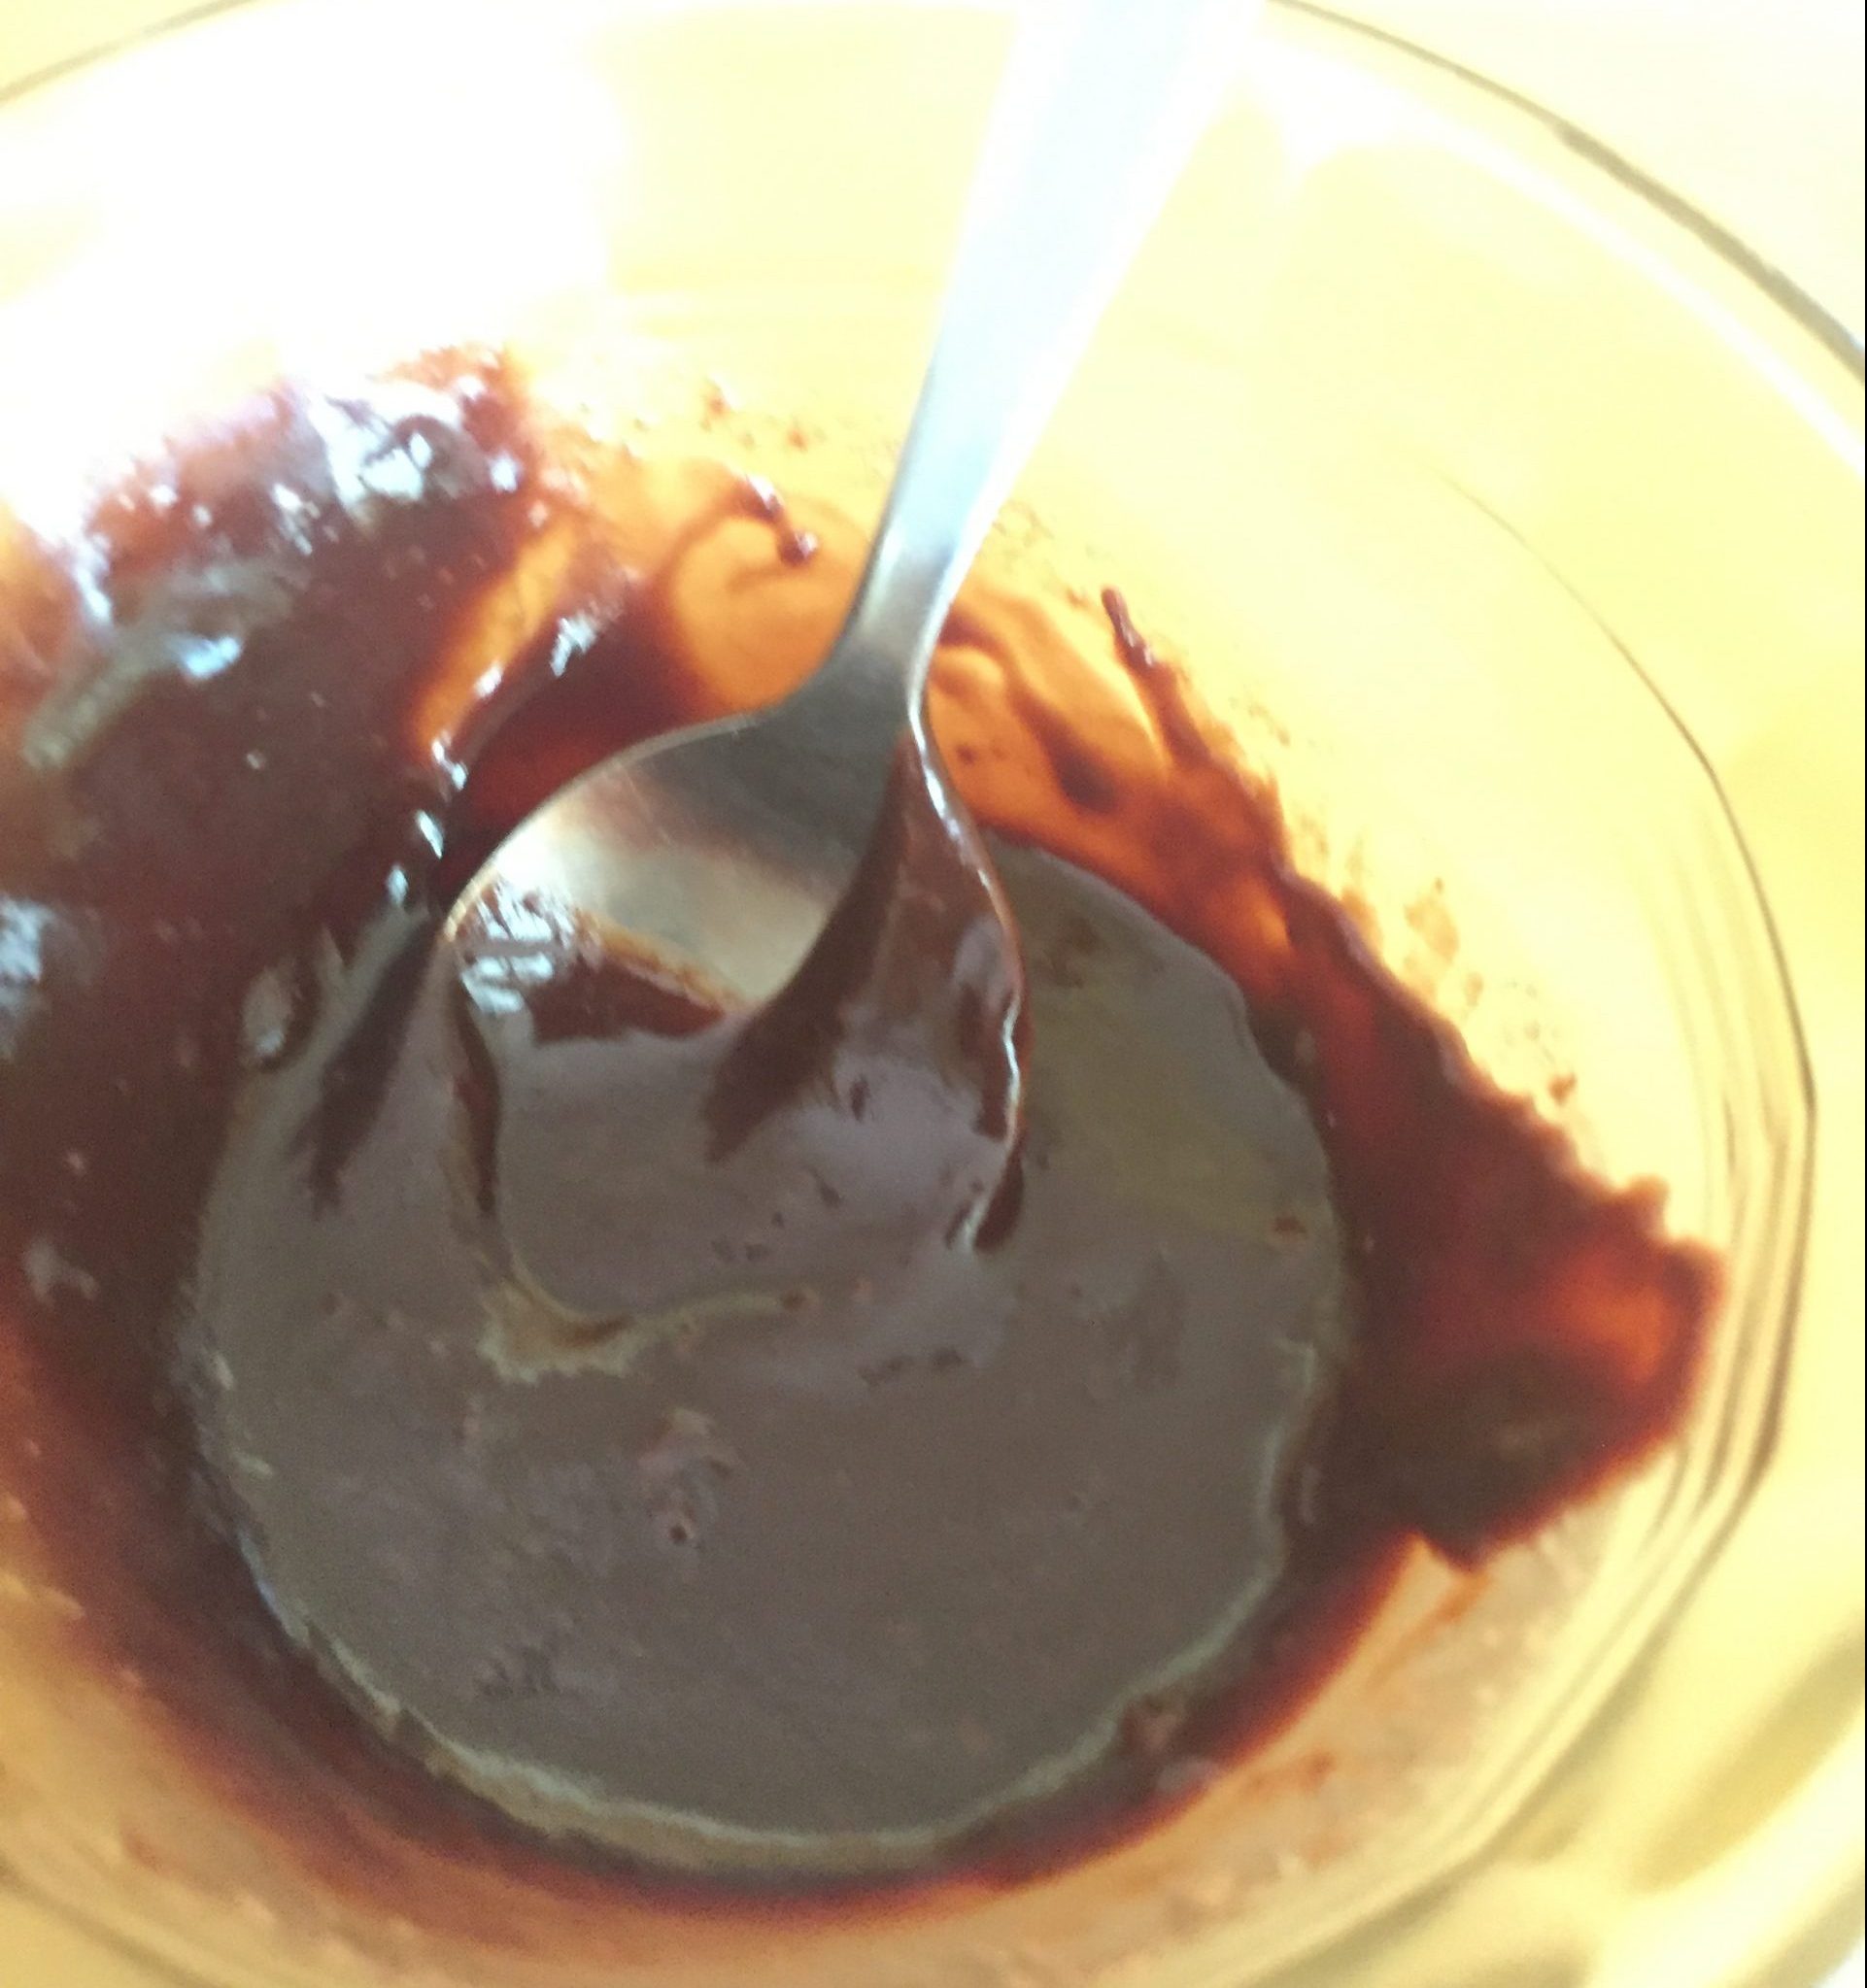 Melted chocolate with water added before microwaving